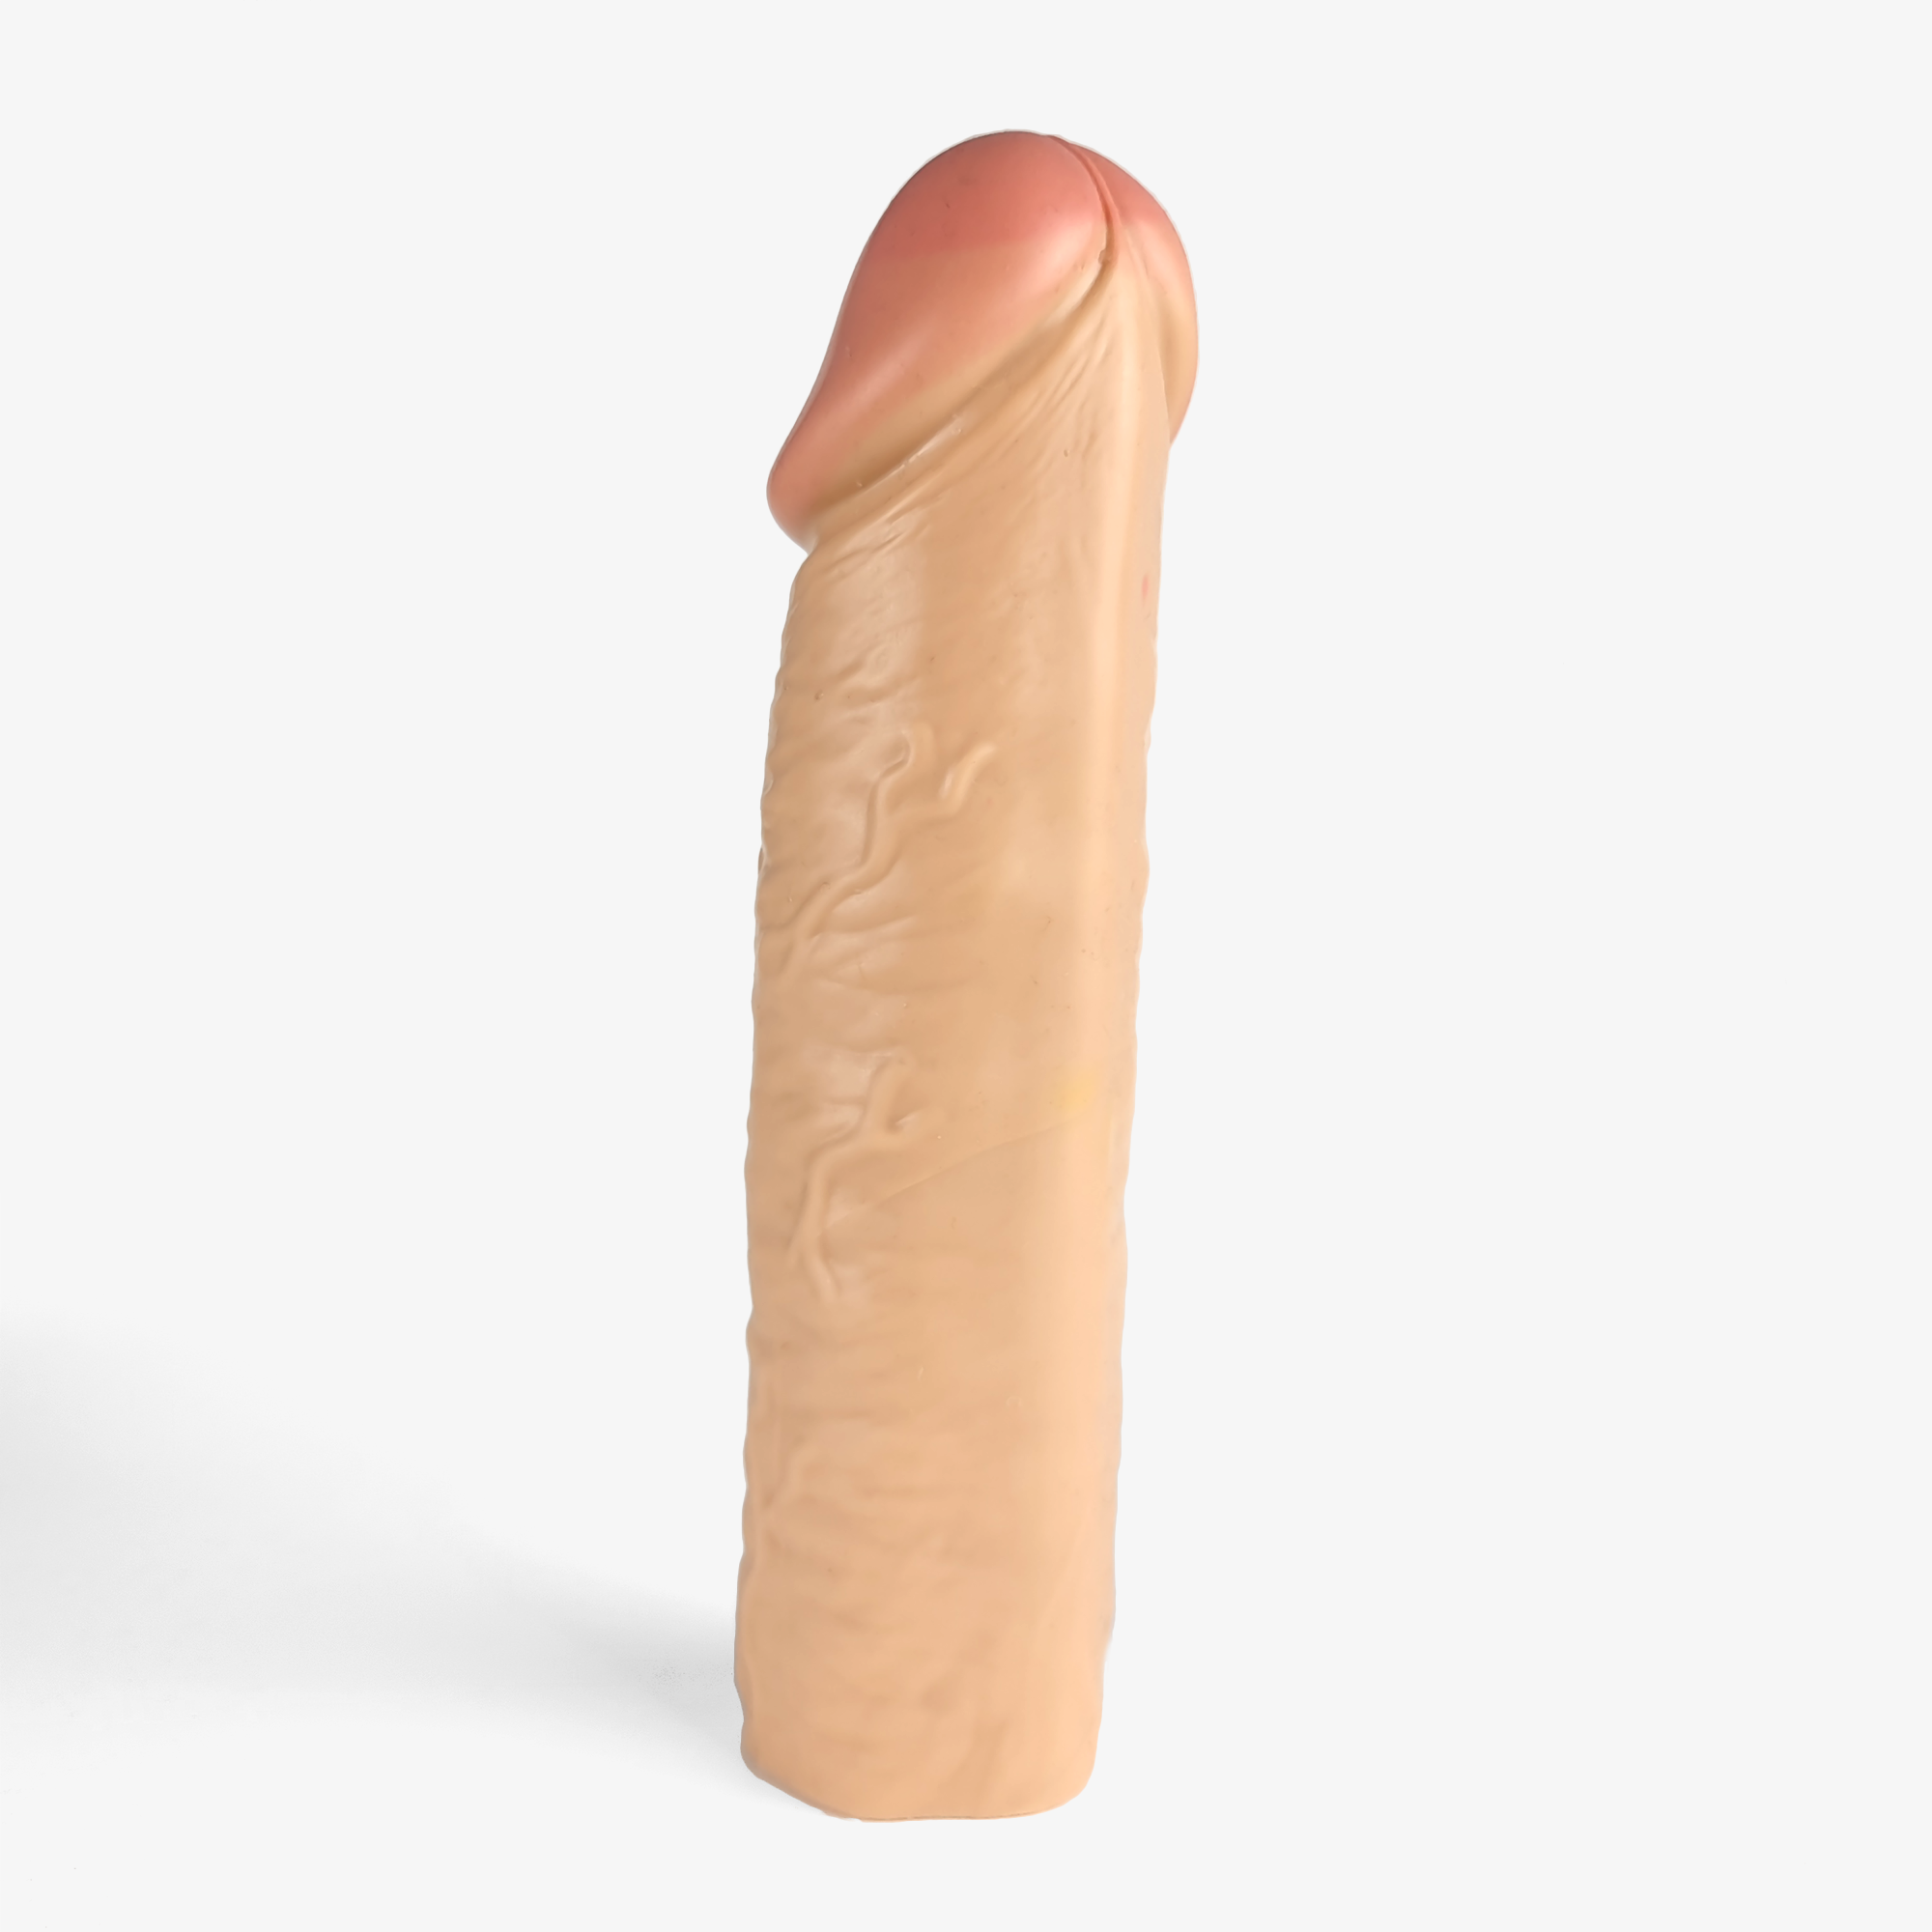 The Made To Measure Penis Extender